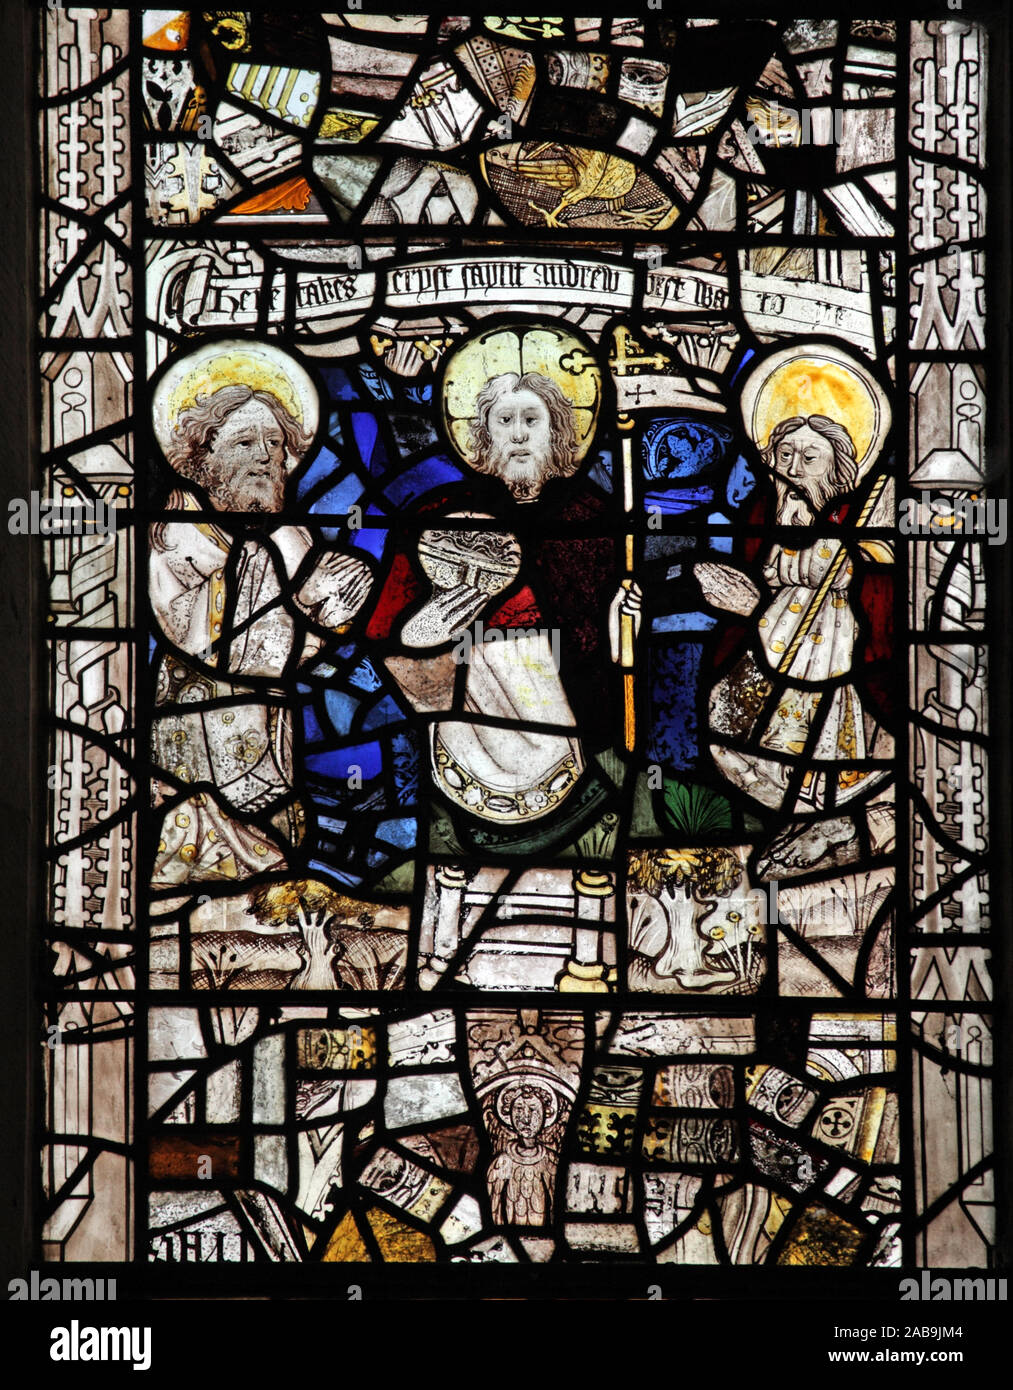 Medieval stained glass window, Church of St Andrew, Greystoke, Cumbria, depicting the 2nd century Apocryphal Story of St Andrew in the City of Wrondon Stock Photo